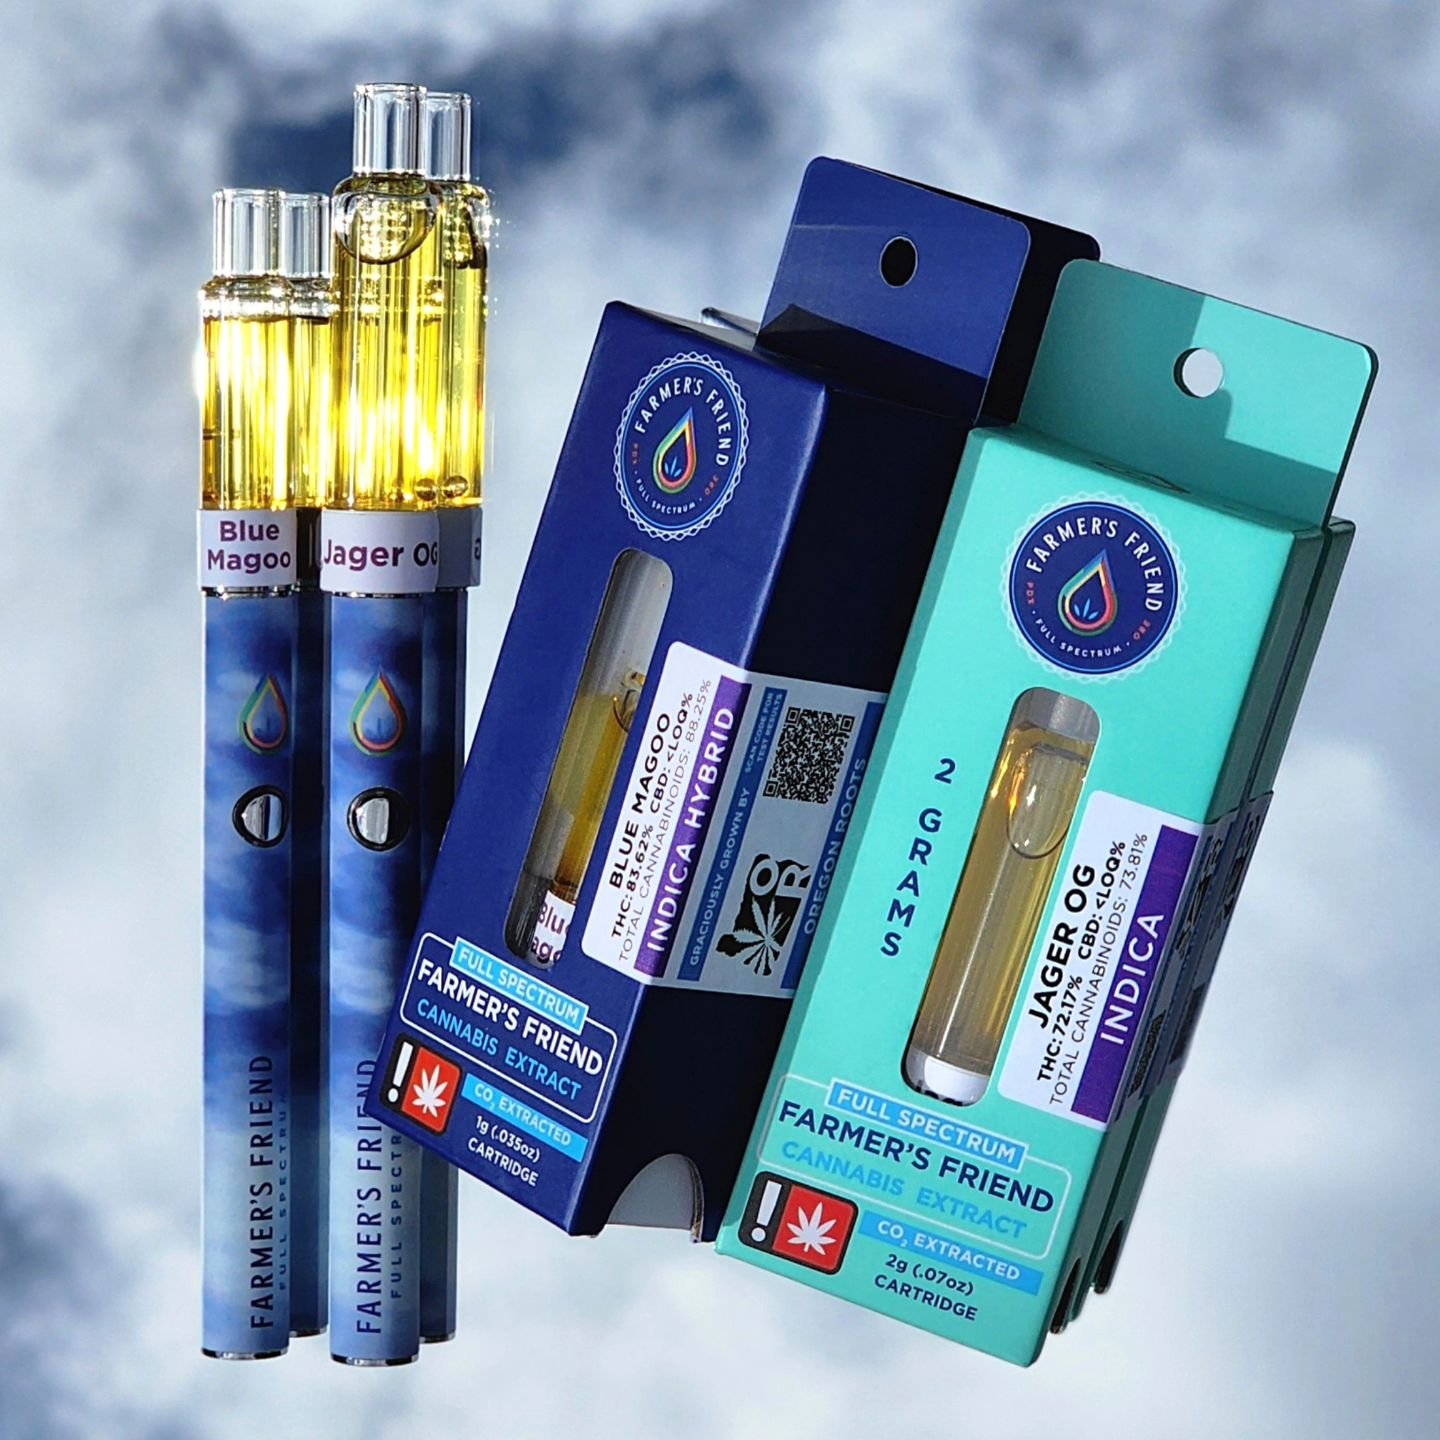 Calling all indica lovers! Don't sleep on these two potent, full spectrum cartridge options made with material sourced from Oregon Roots. Find your happy place with 1g Blue Magoo carts (DJ Short Blueberry x Williams Wonder F2), or chillax for days wi